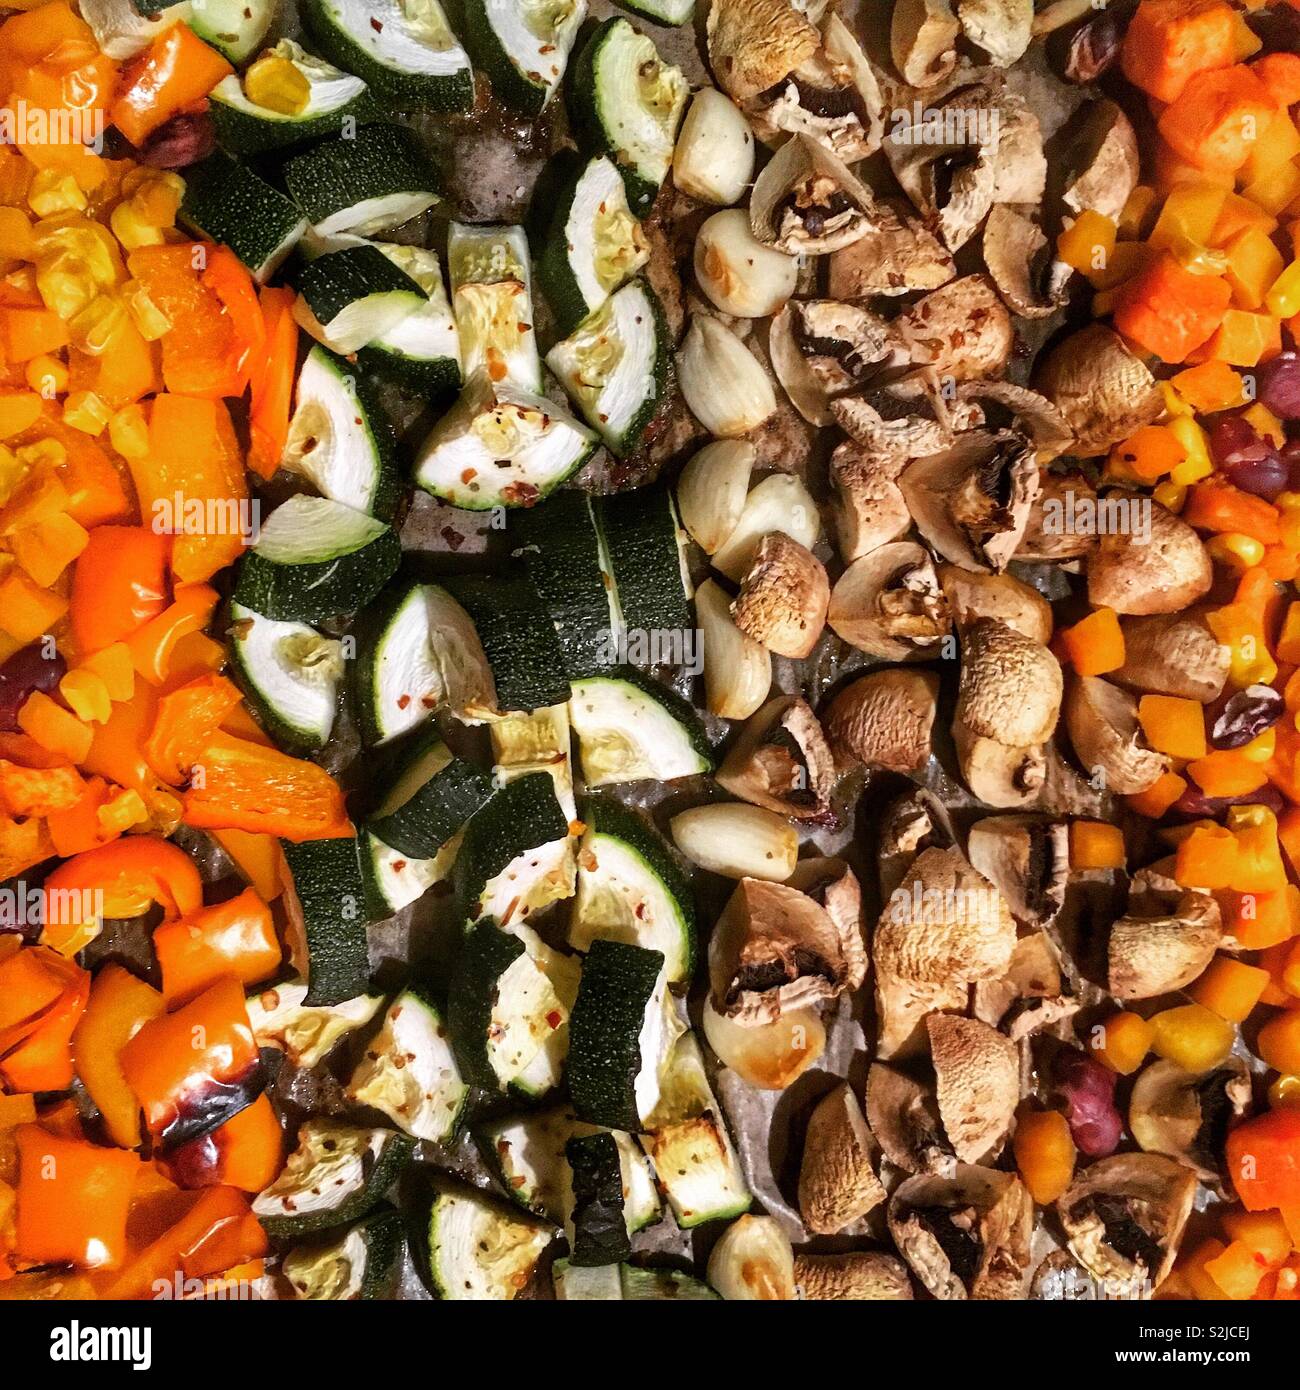 Oven roasted vegetables Stock Photo